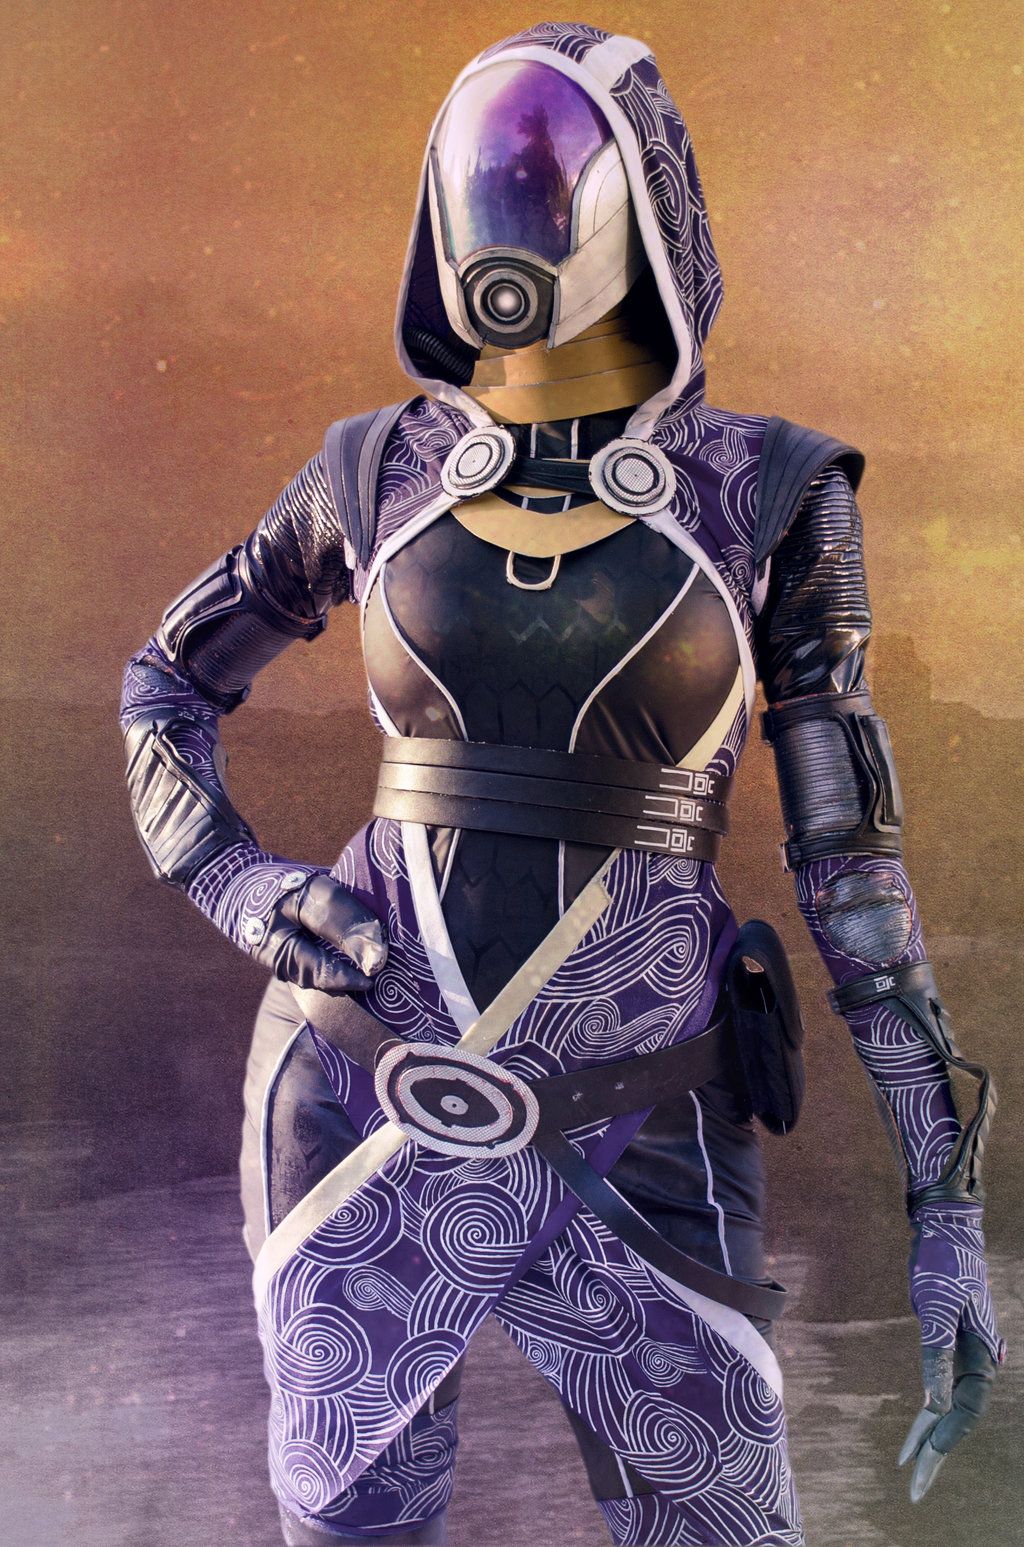 deb ramsey recommends Mass Effect Cosplay Tali